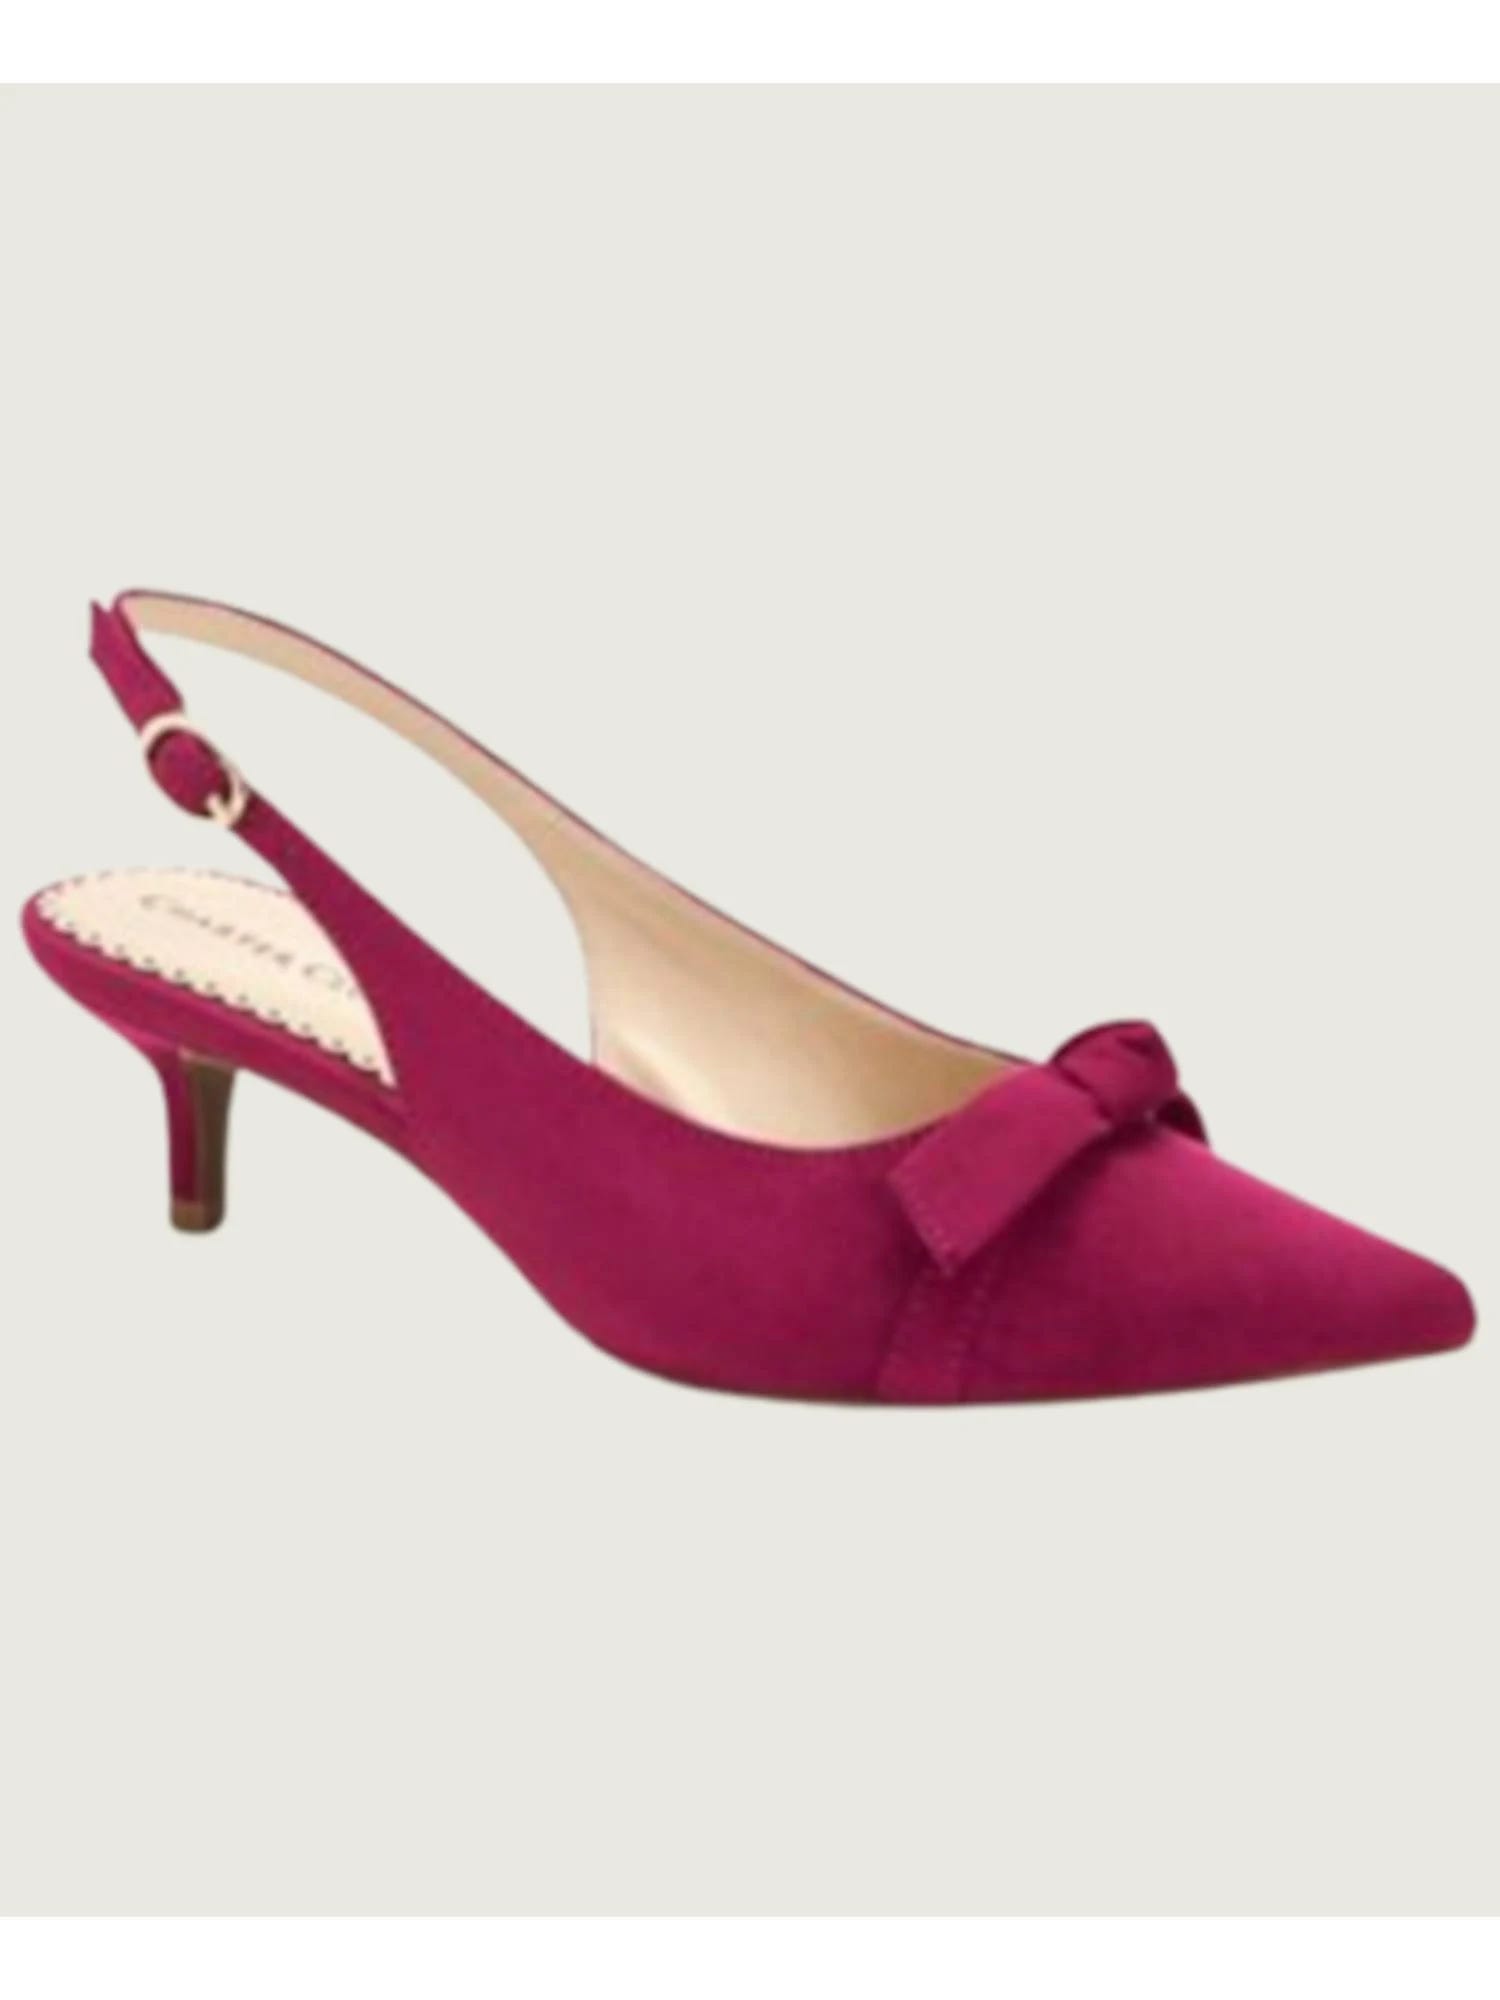 Sophisticated Purple Bow Bow Accent Heels | Image